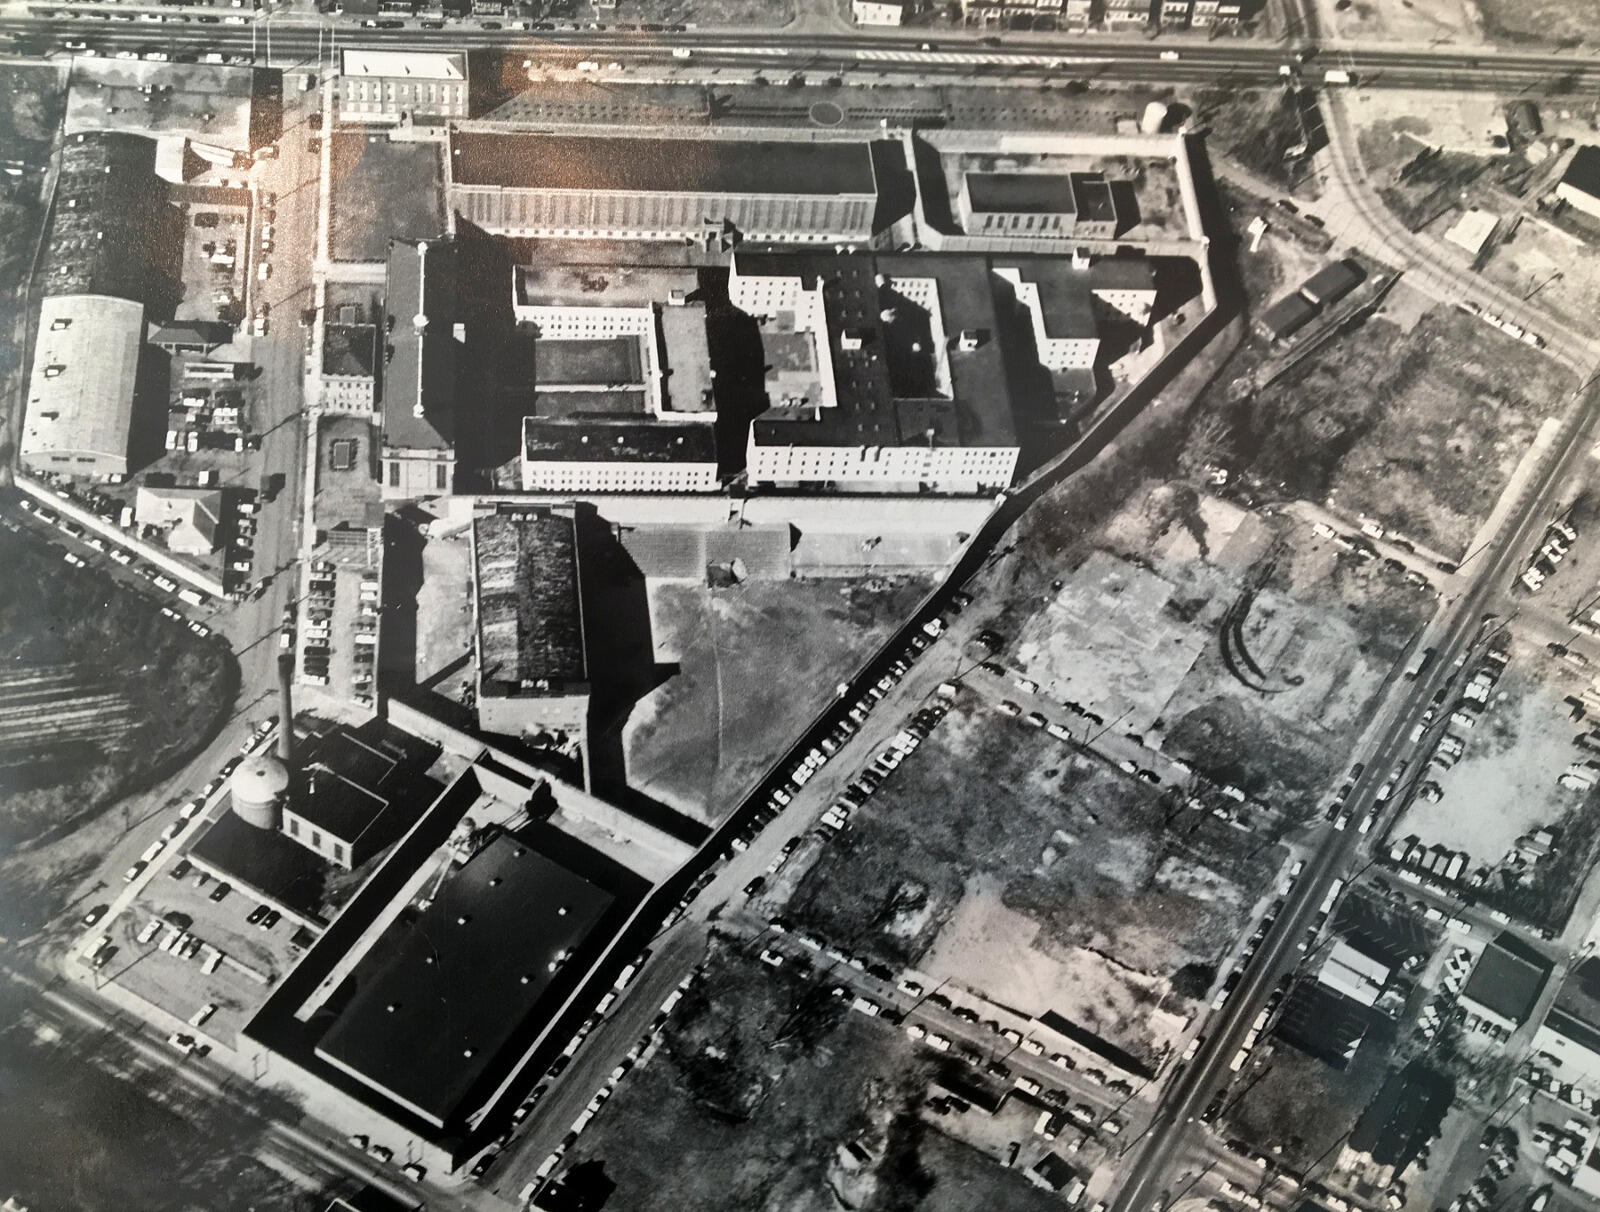 An aerial view of the Virginia State Penitentiary in 1971.